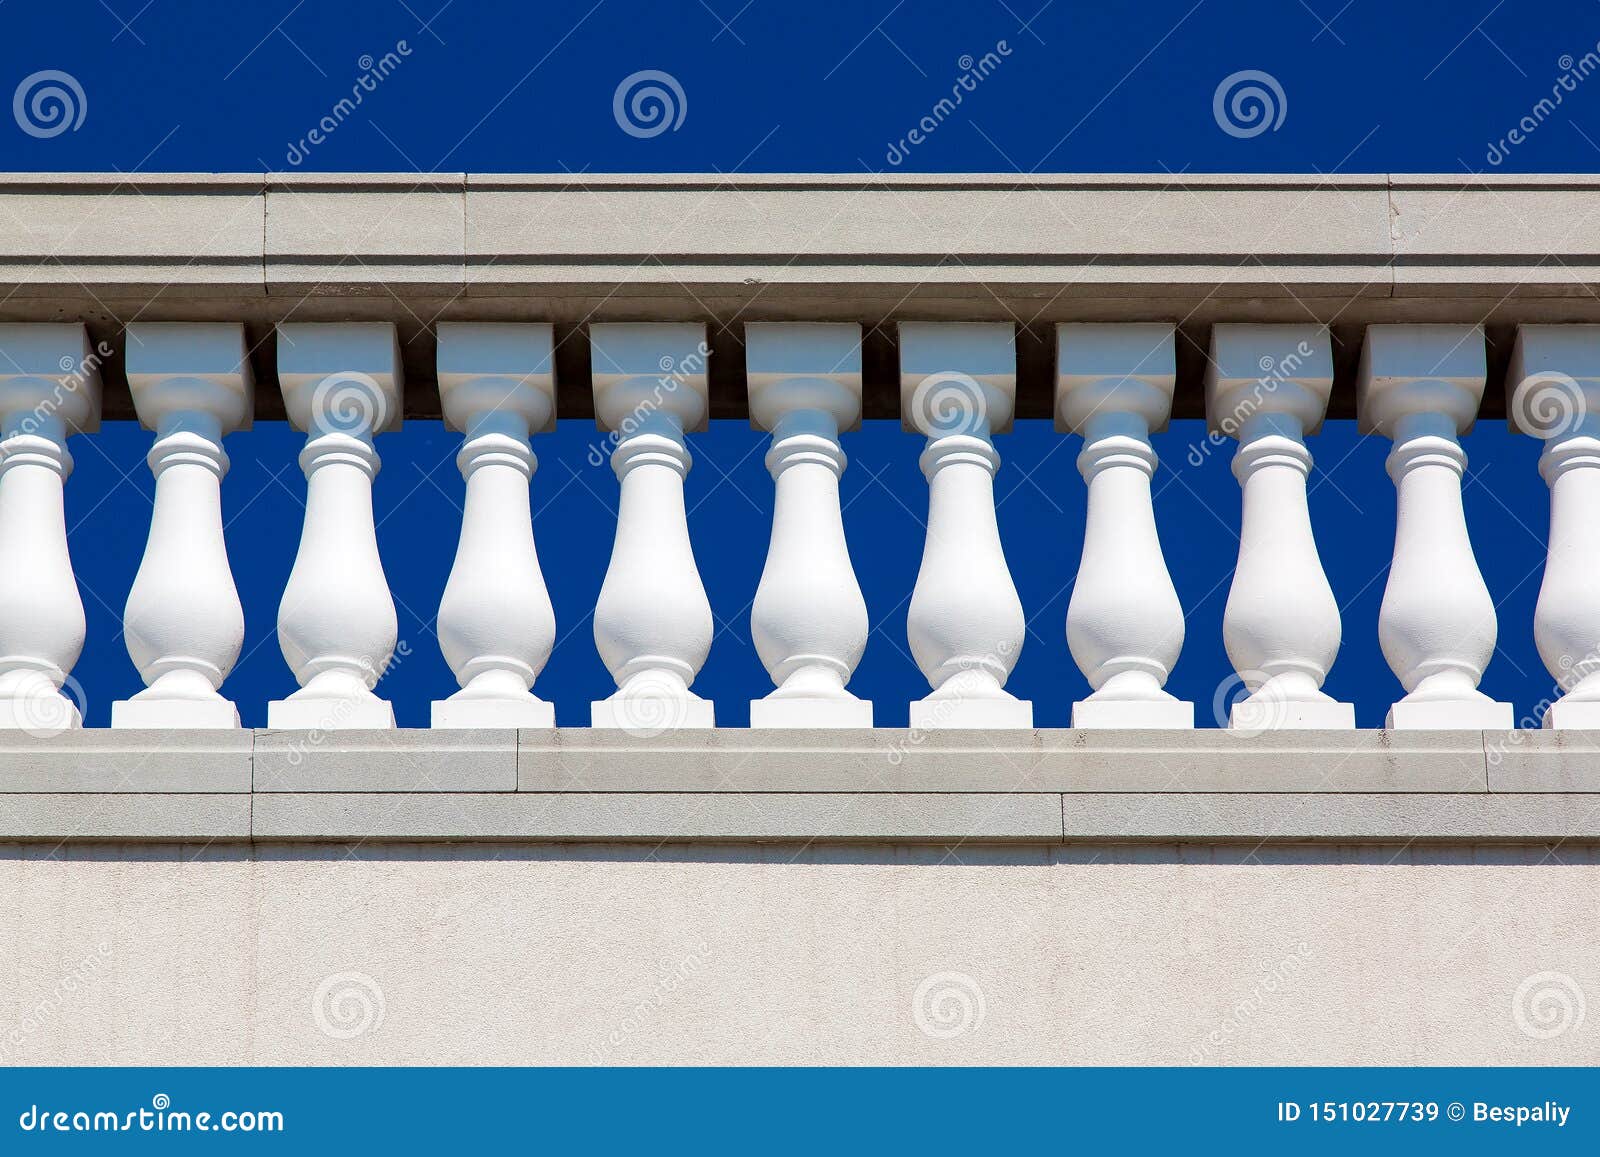 Baroque Architecture Details Of Balustrades Stock Image Image Of Architectural Park 151027739